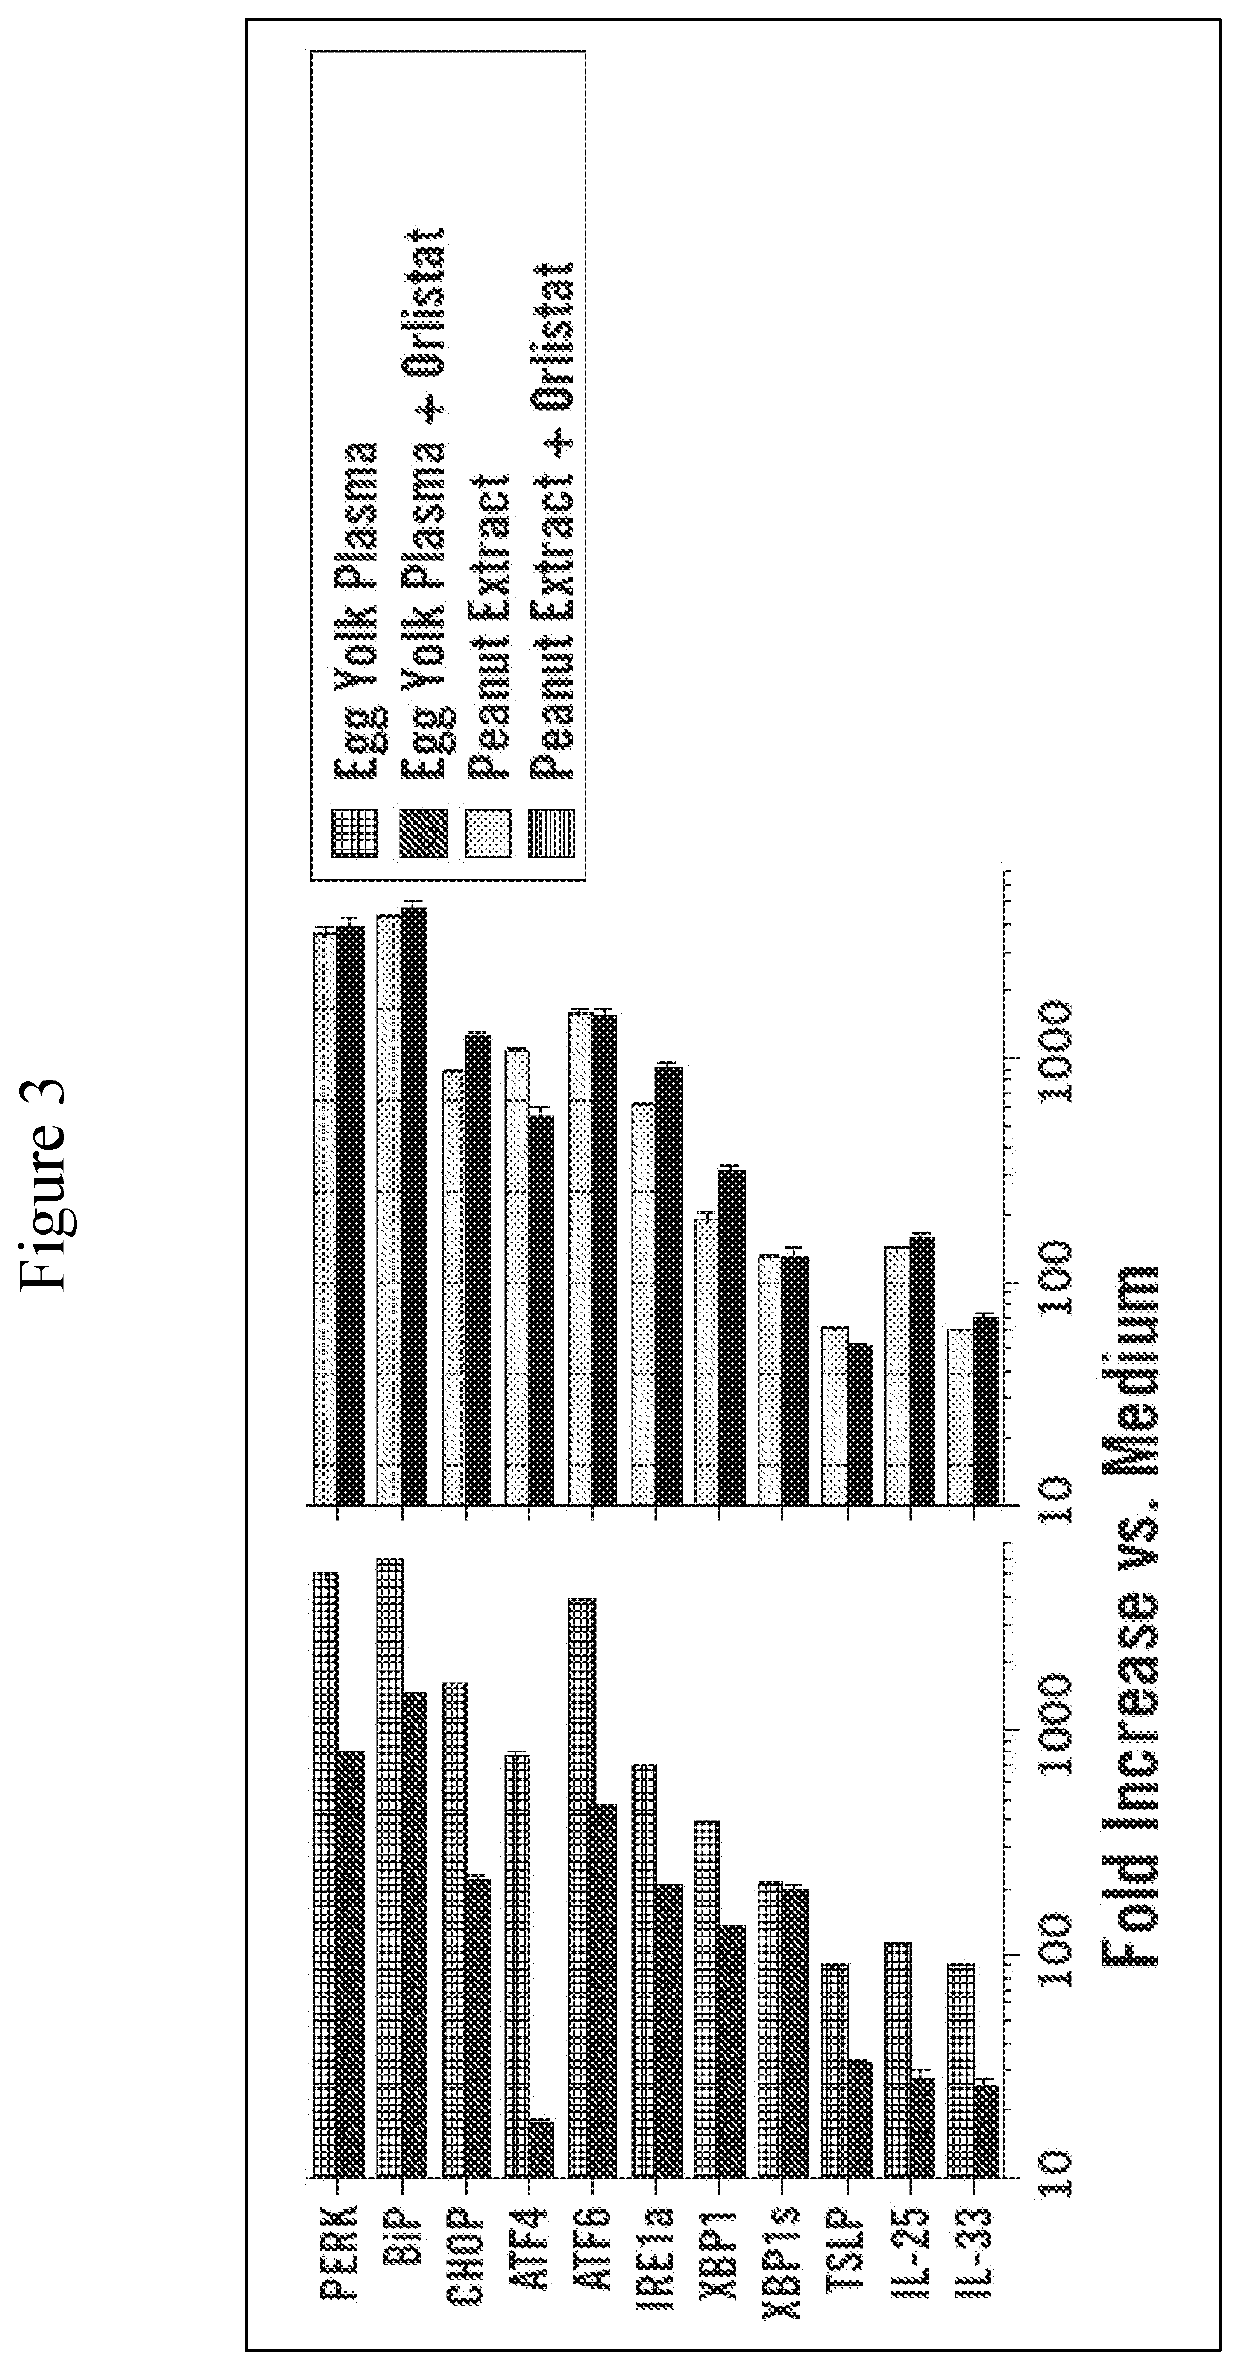 Inhibition of unfolded protein response for suppressing or preventing allergic reaction to food